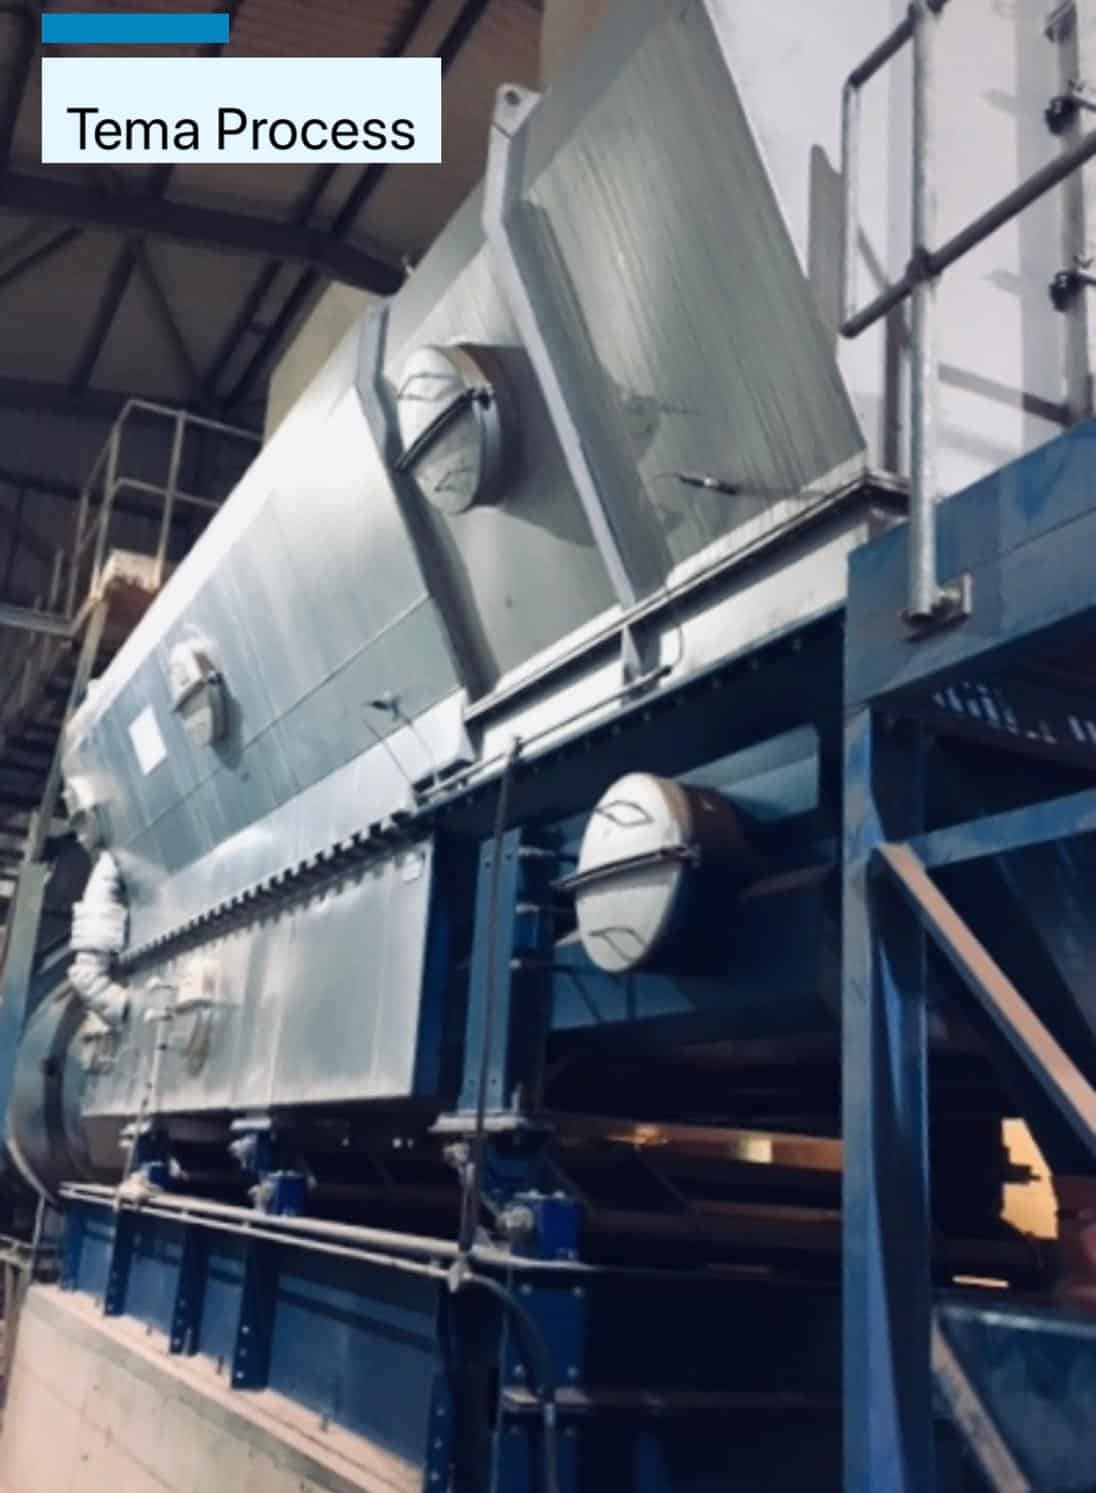 Fluidbed dryers/coolers are used for handling materials coming from quarries like dolomite, sand, limestone, gypsum, clay